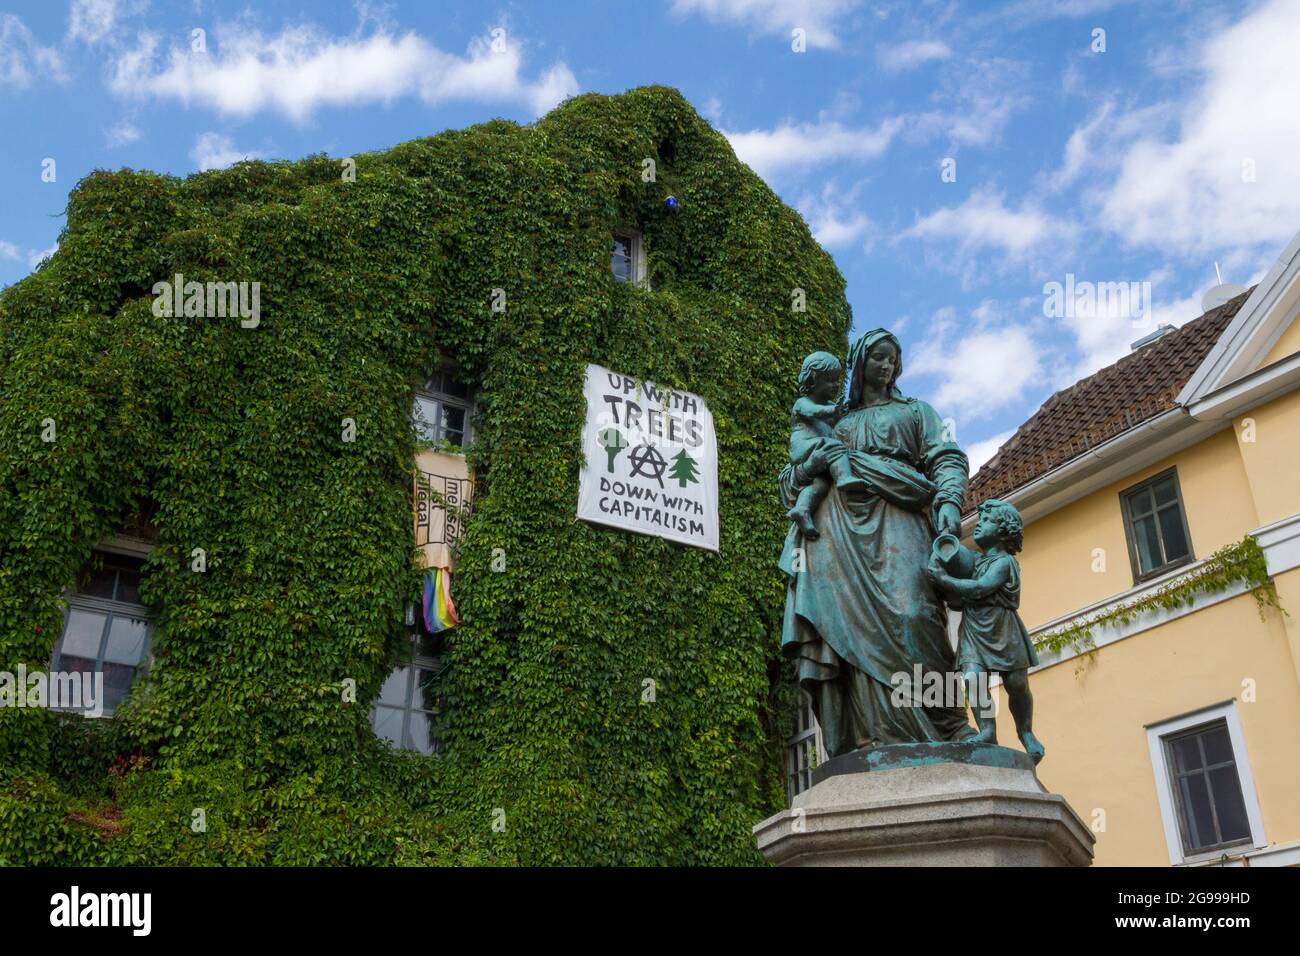 Mother with children statue (Donndorfbrunnen statue) and house with 'up with trees down with capitalism' sign in Weimar, Germany Stock Photo